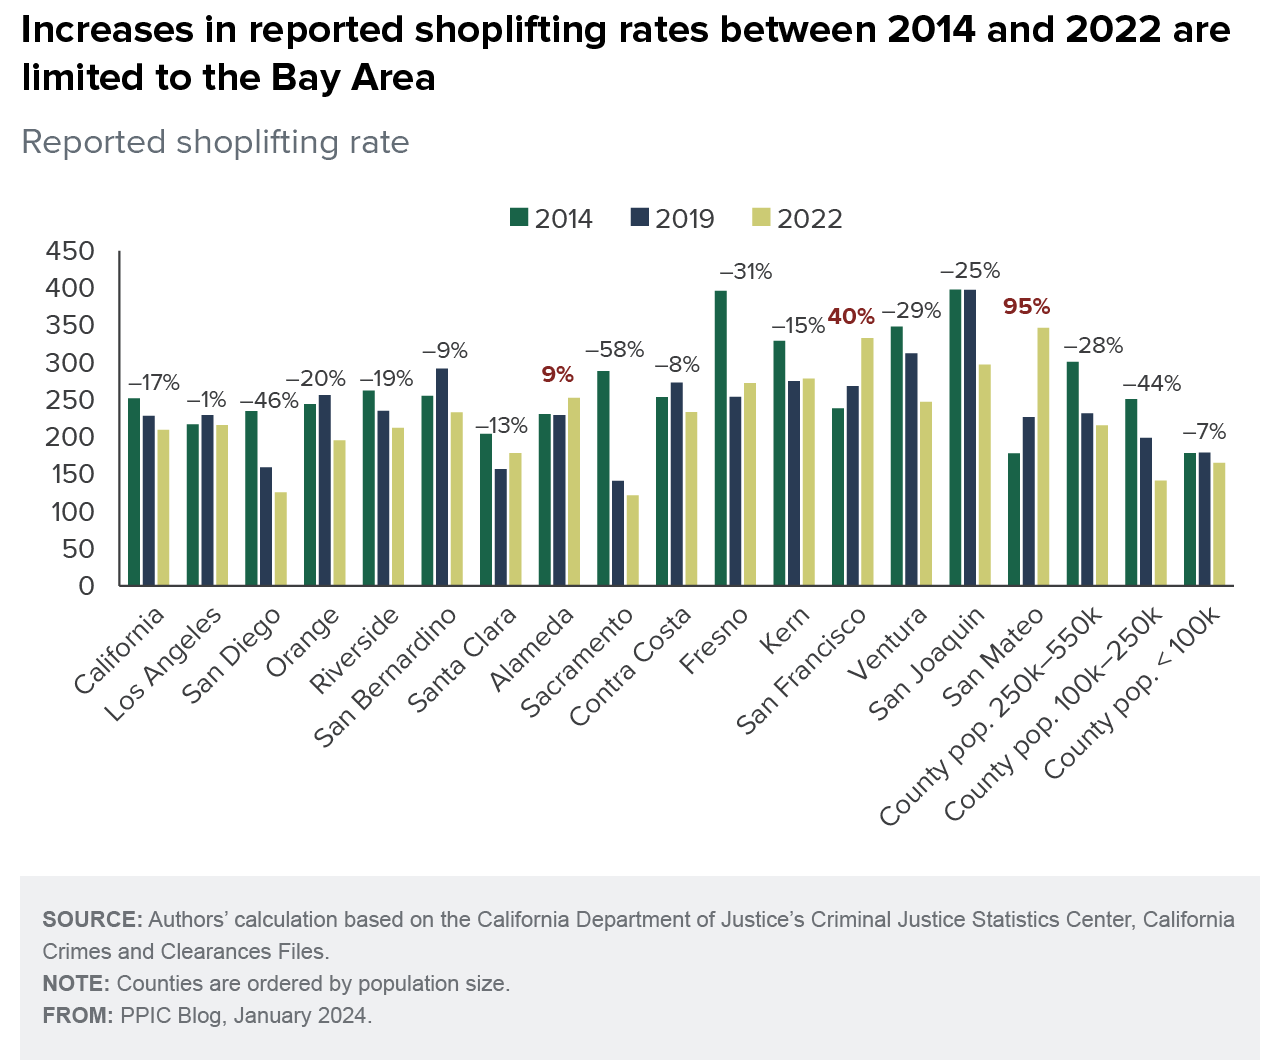 figure - Increases in reported shoplifting rates between 2014 and 2022 are limited to the Bay Area